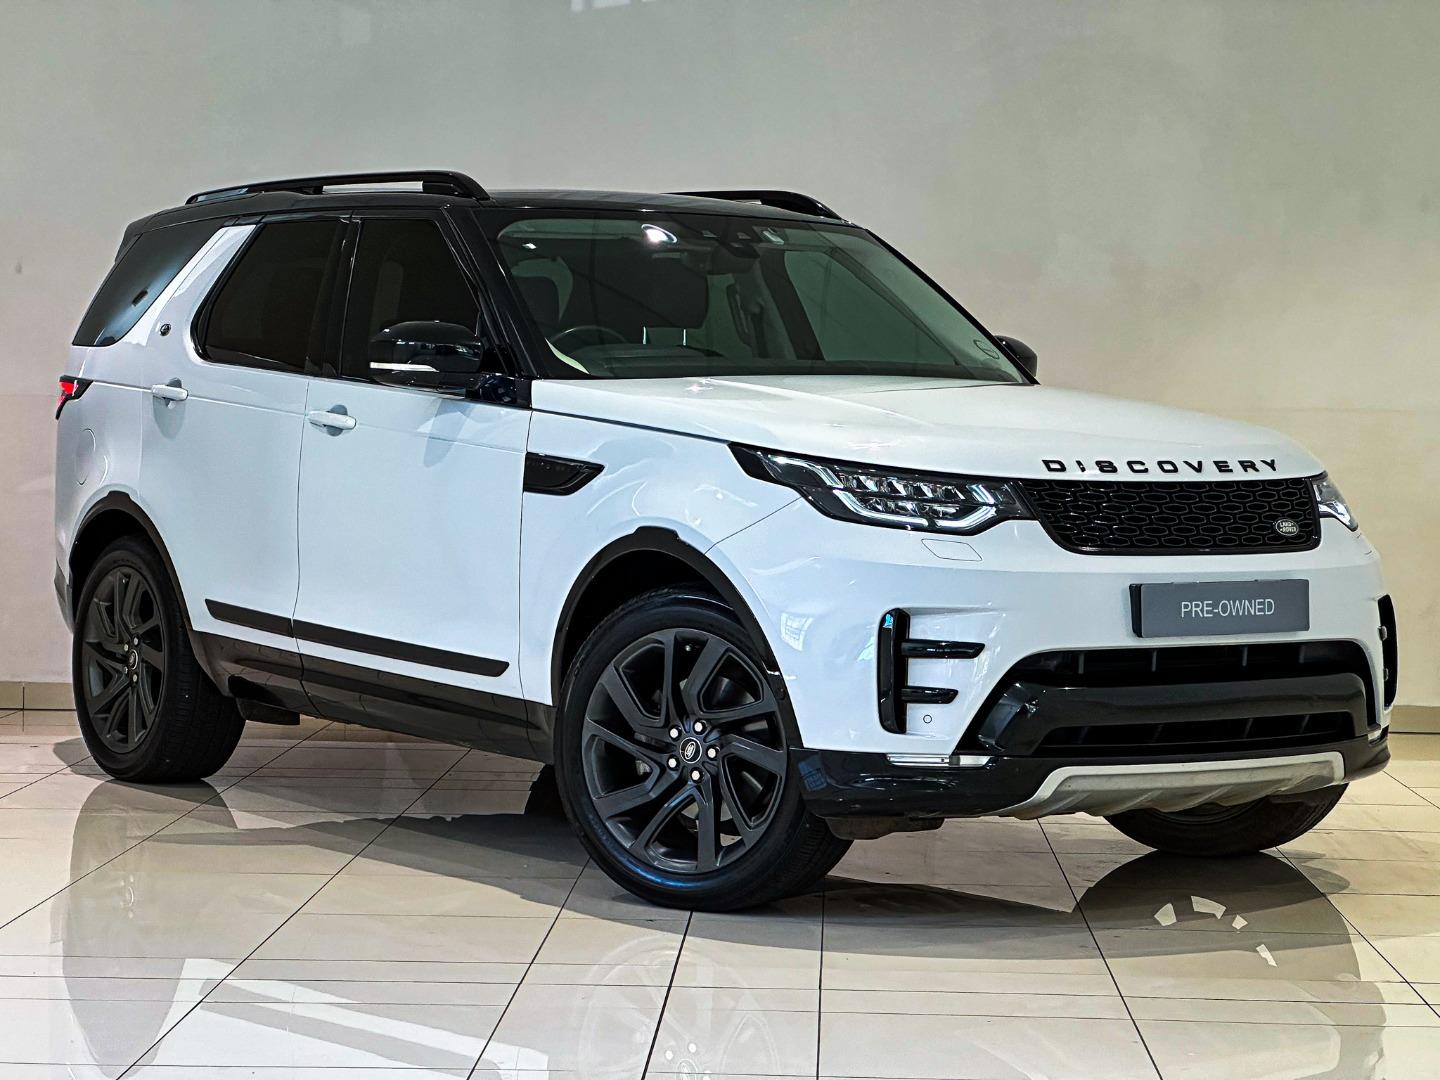 2019 Land Rover Discovery HSE Td6